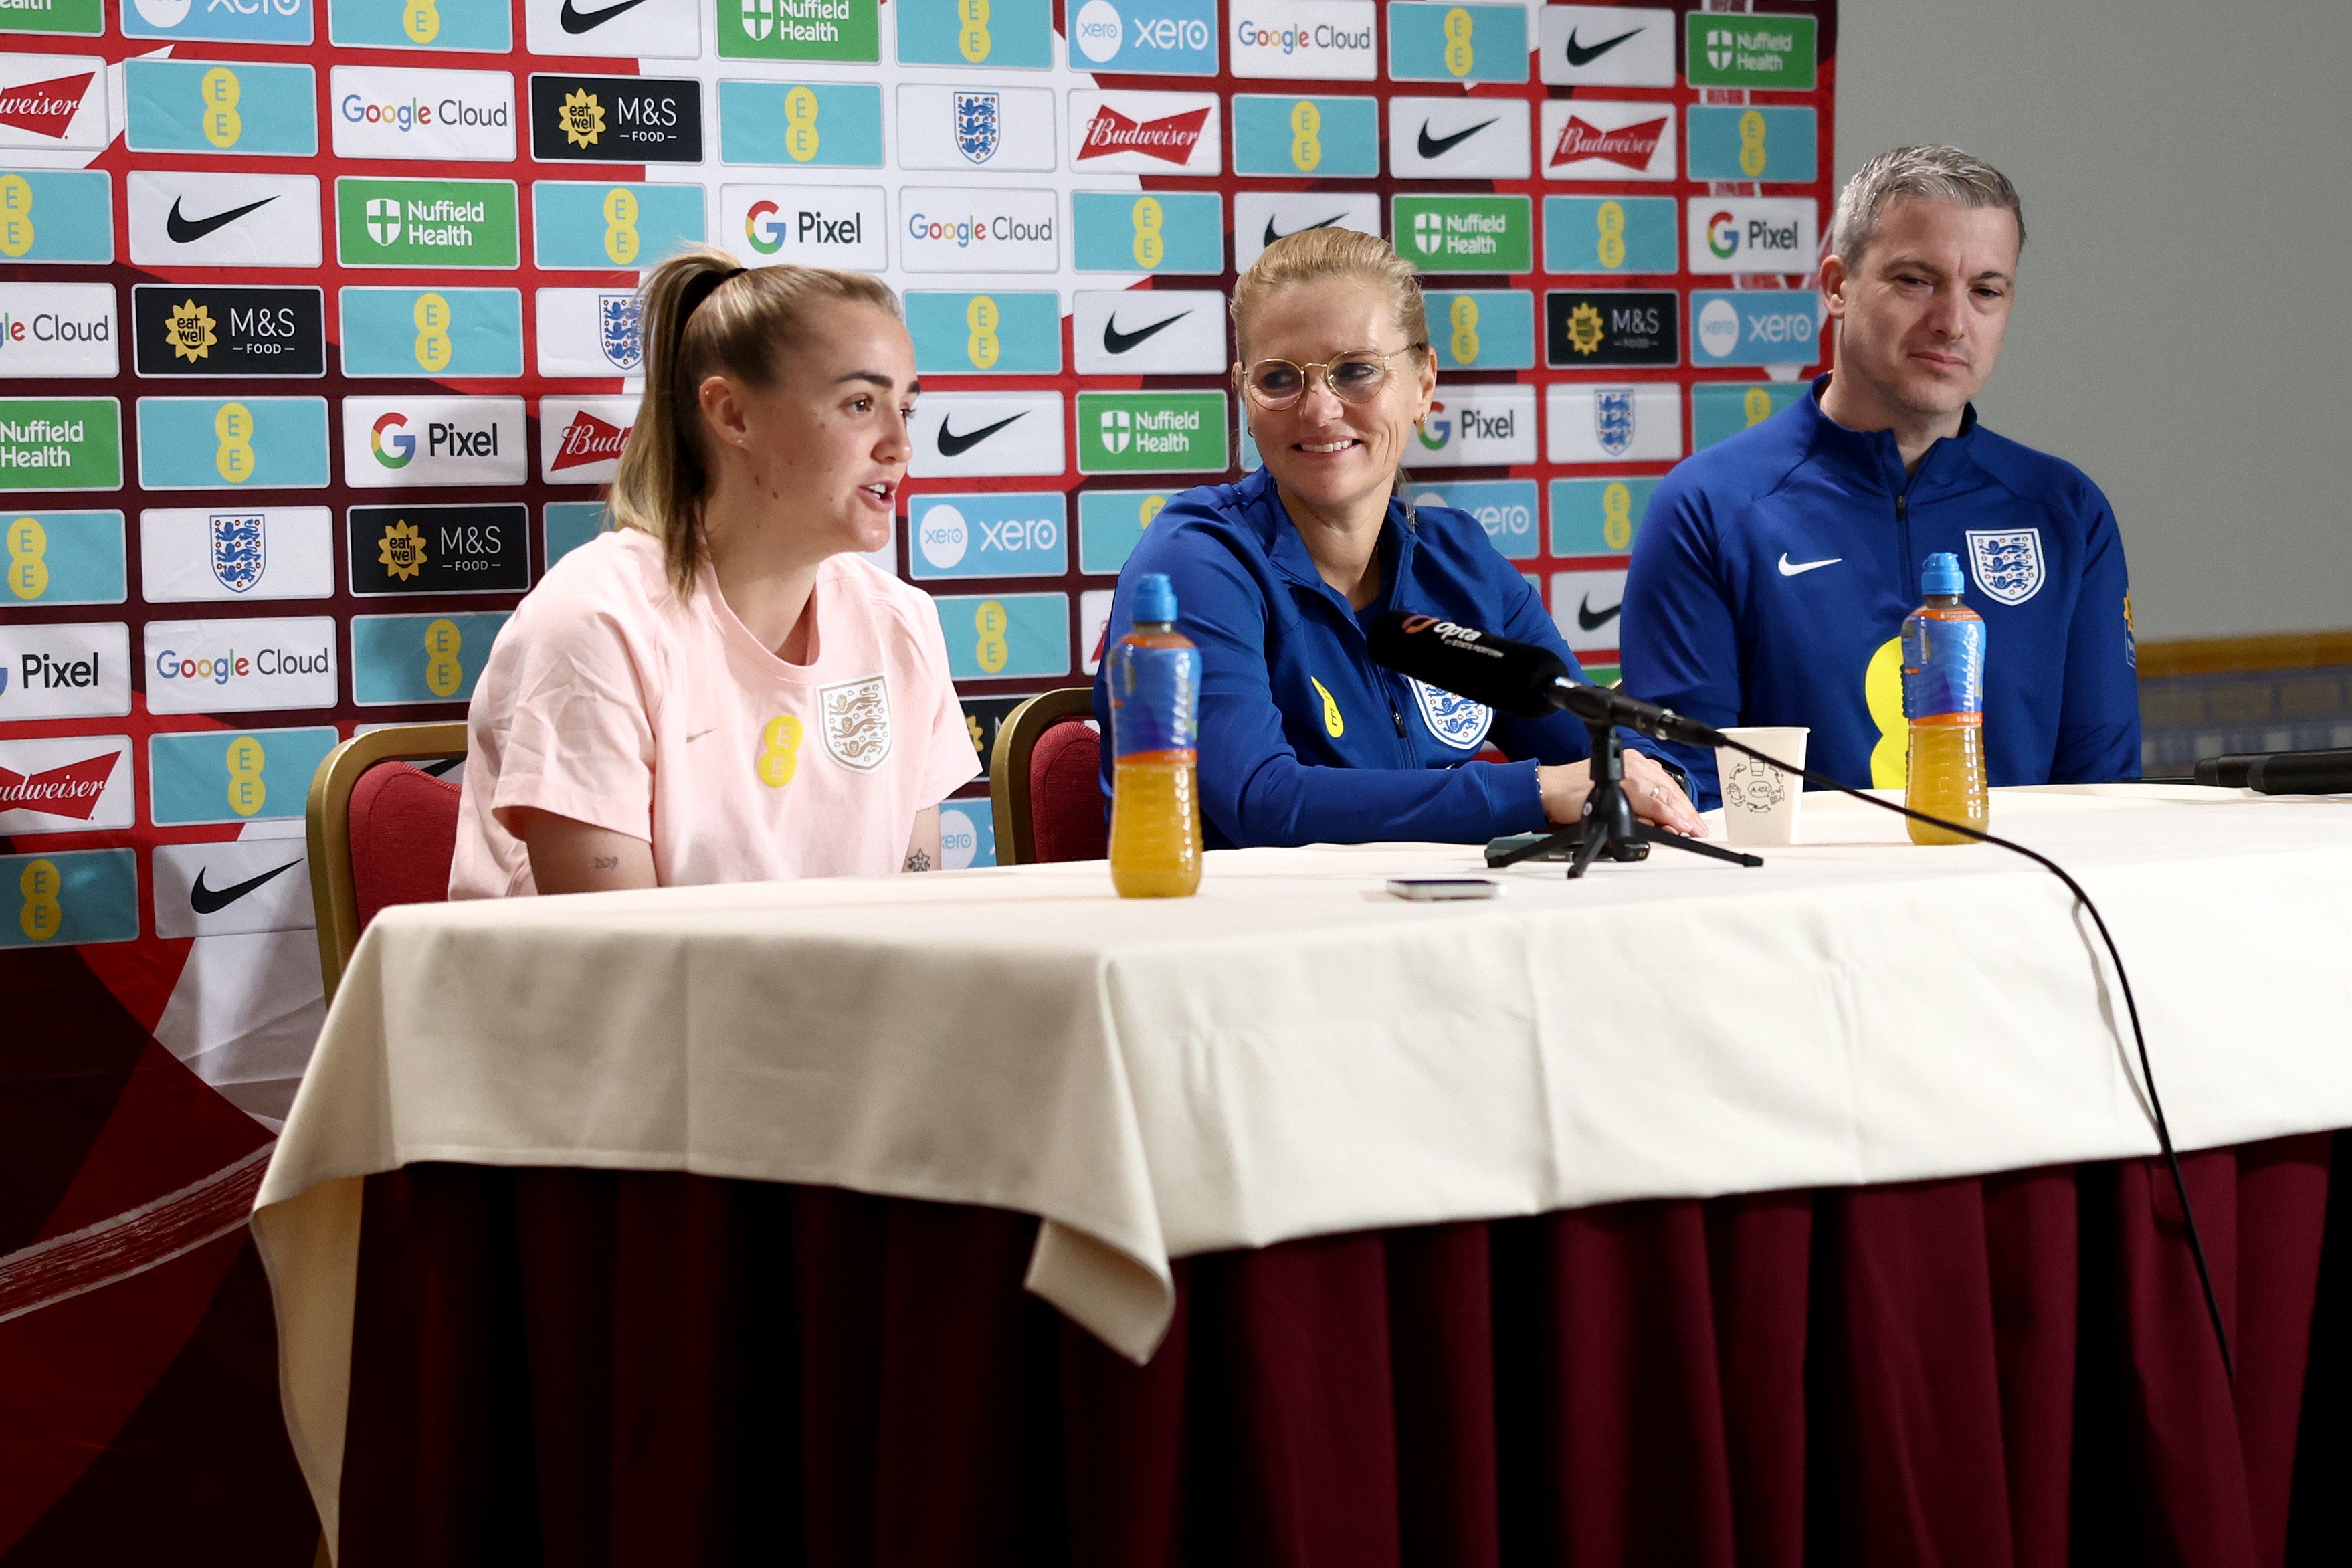 Sarina Wiegman is looking to the future ahead of friendly matches